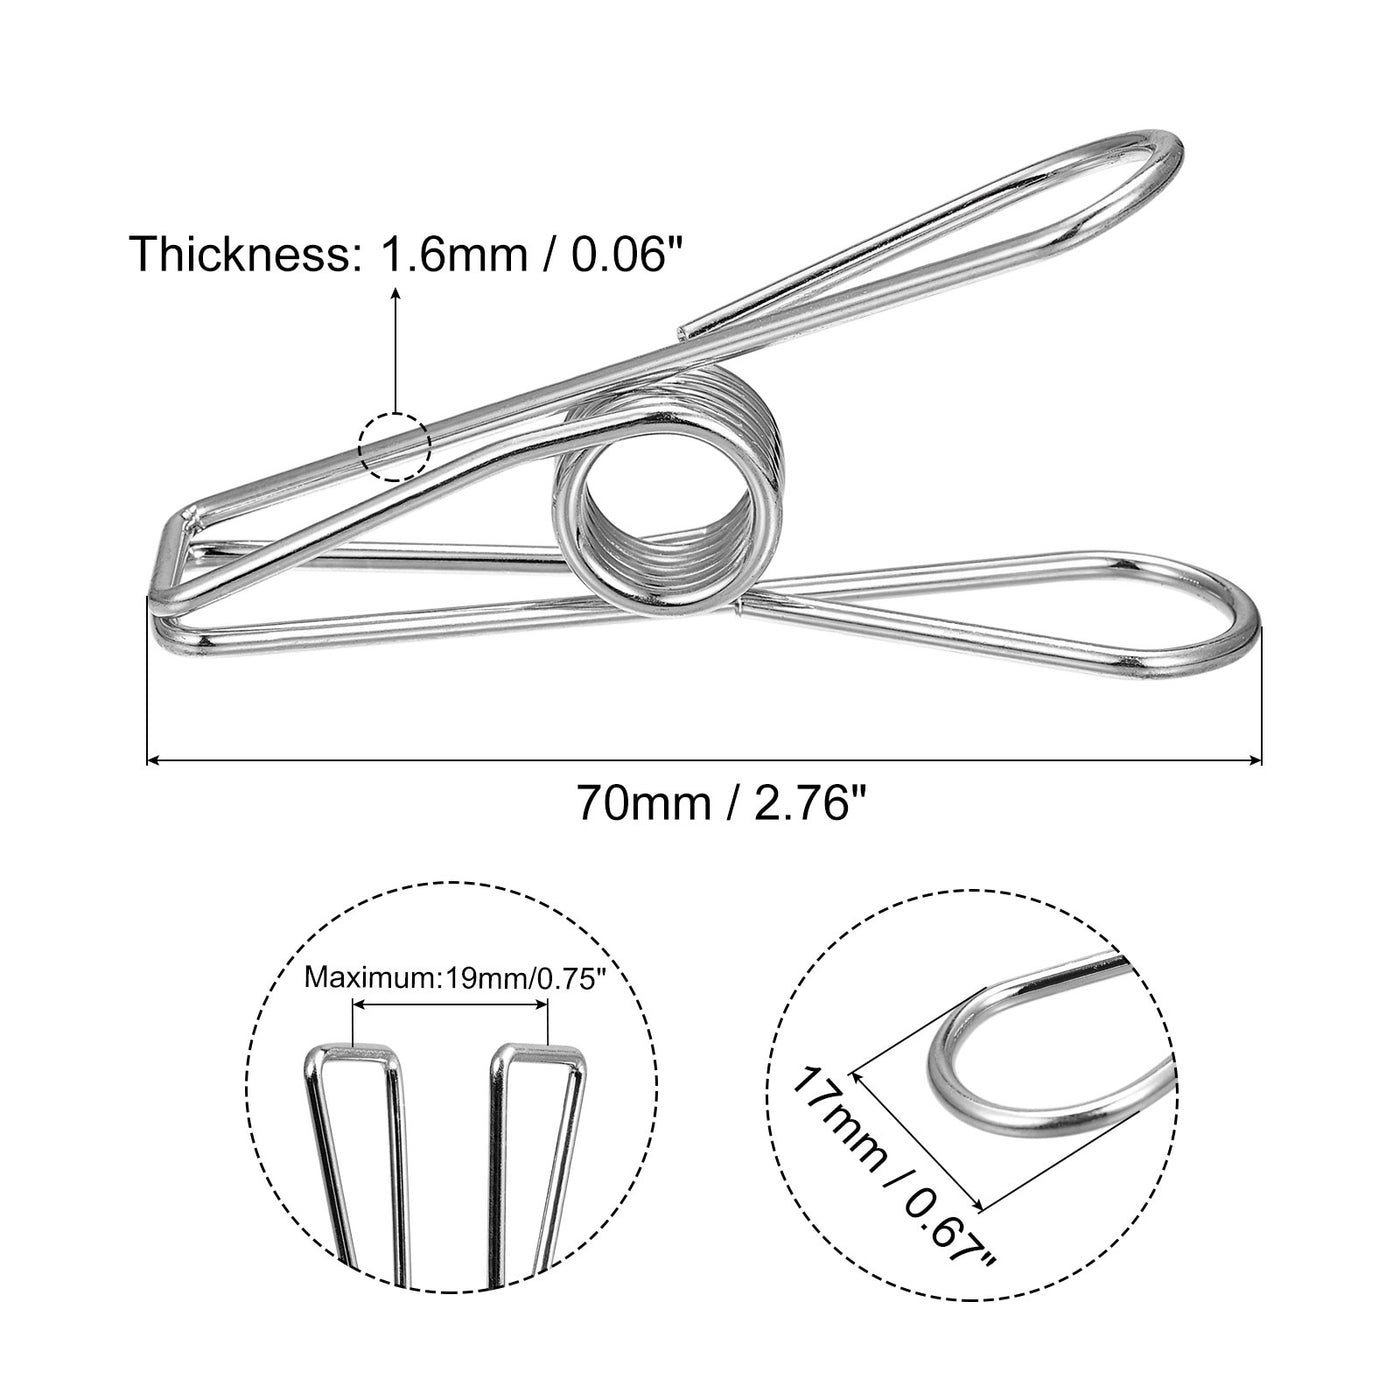 uxcell Uxcell Tablecloth Clips, 70mm Carbon Steel Clamps for Fix Table Cloth, Silver 8 Pcs